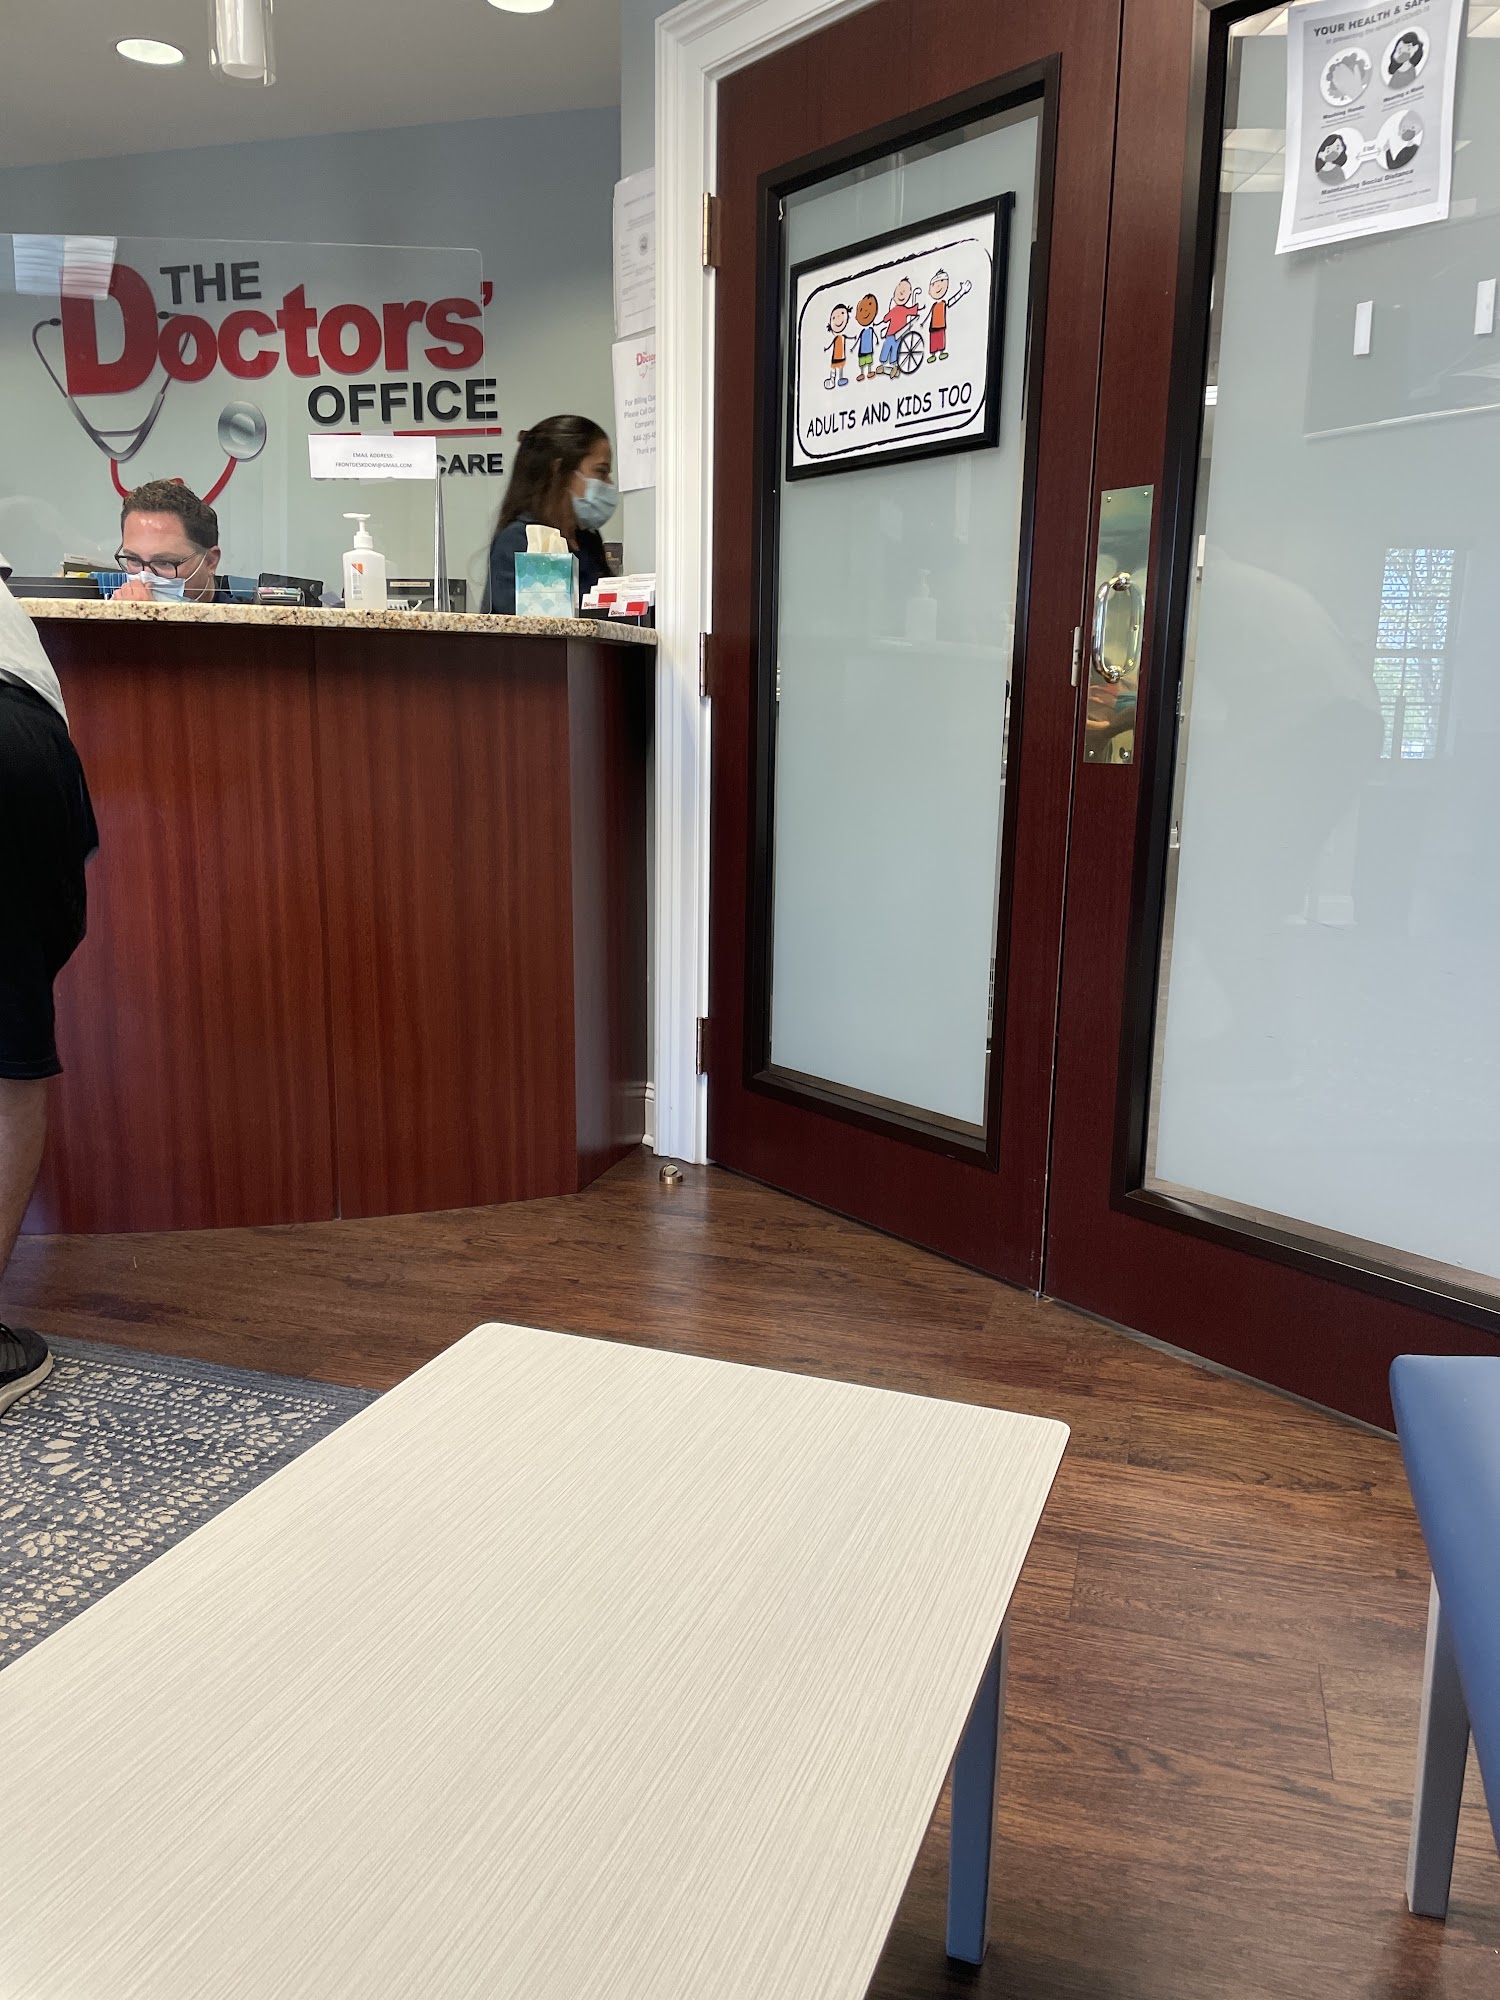 The Doctors' Office Urgent Care of Manalapan, NJ